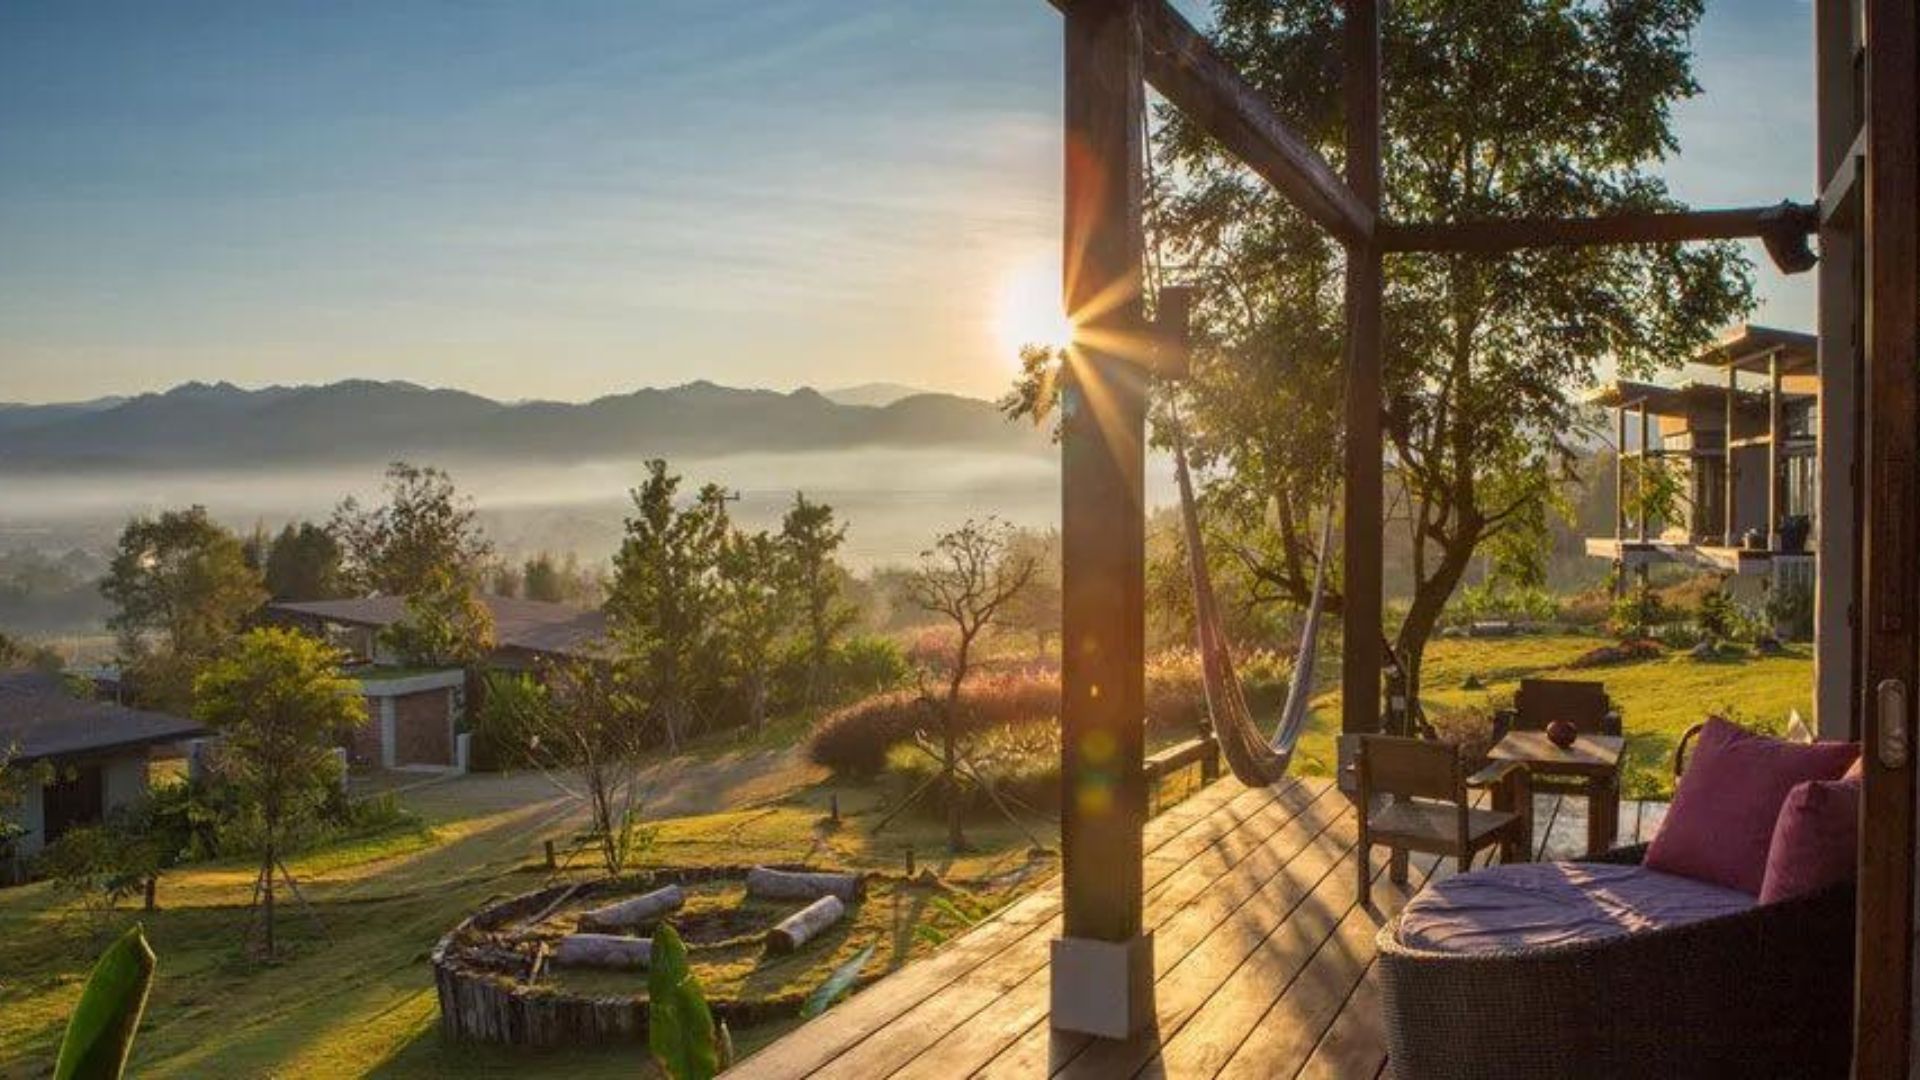 These Thailand Mountain Resorts Offer The Most Panoramic Views